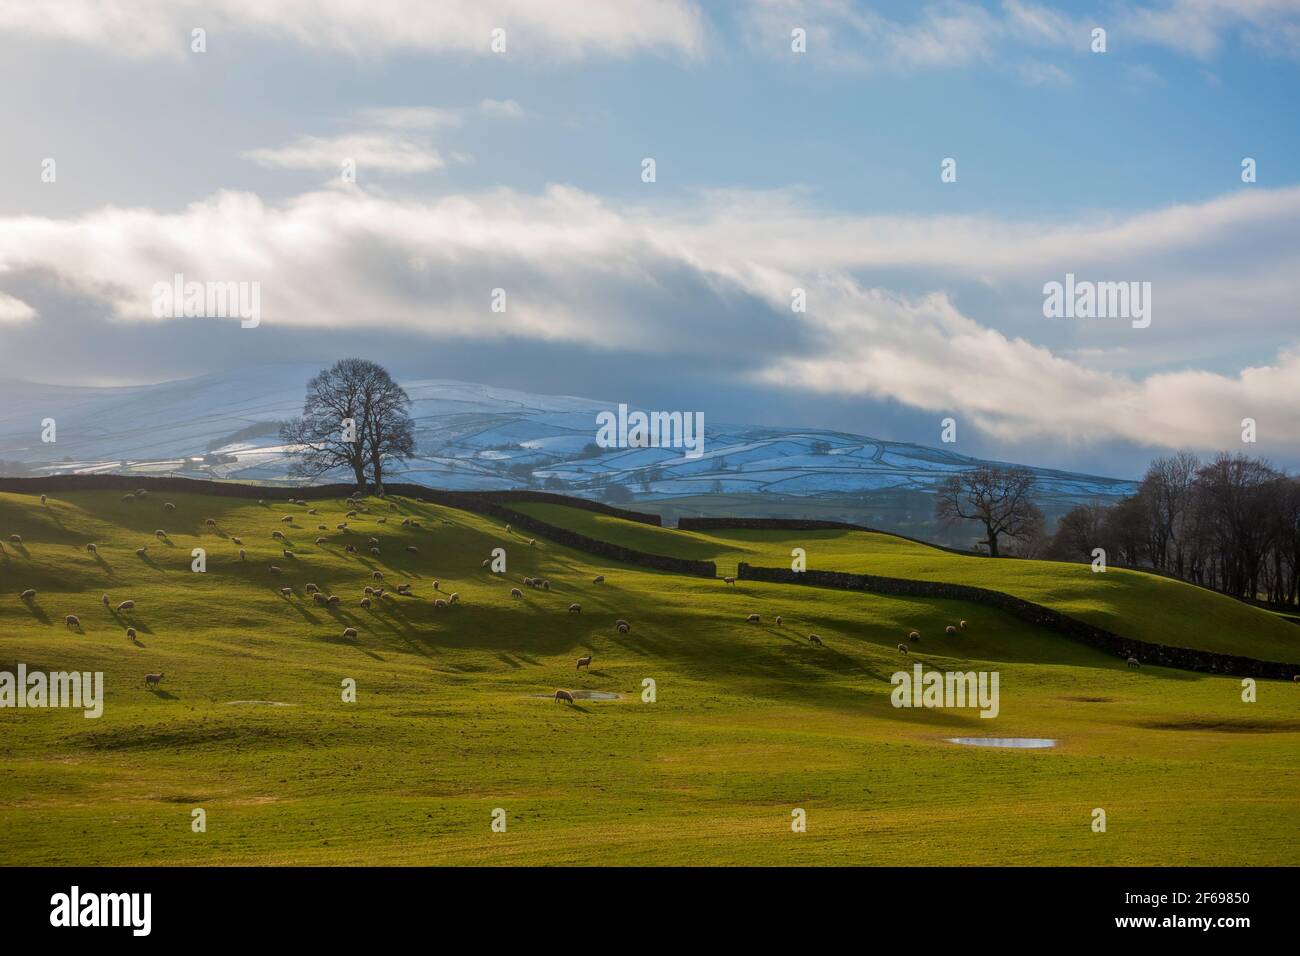 Pascolo delle pecore in inverno a Wensleydale, Yorkshire Dales National Park Foto Stock